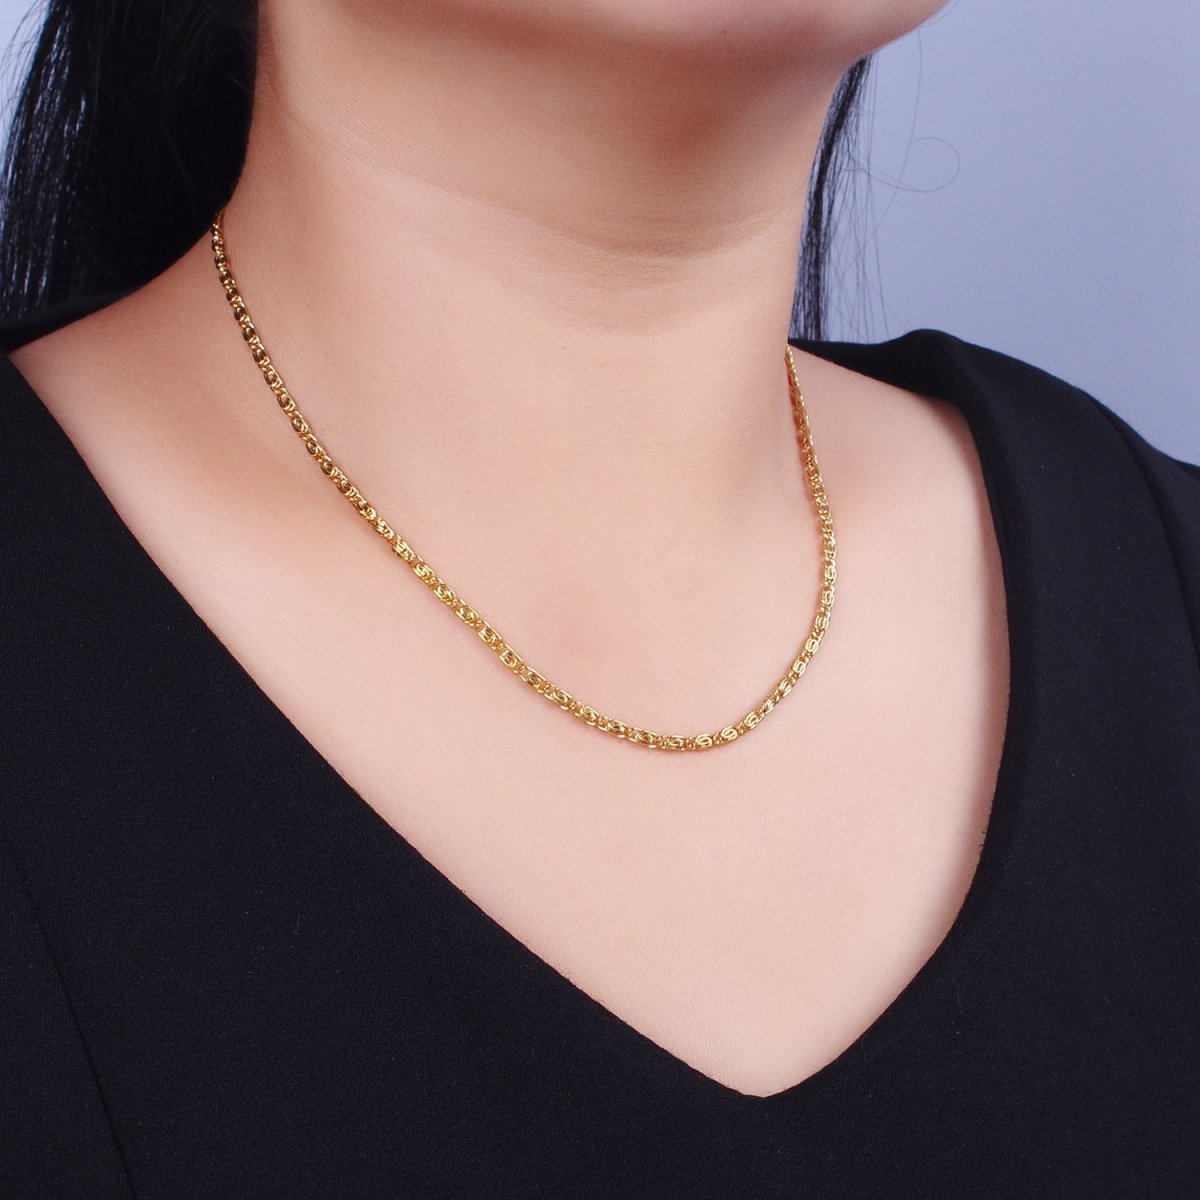 24k Gold Filled 2.6mm Gold & Silver Scroll Chain in 16, 18, 20 Inch Length Necklace | WA-1482 to WA-1489 Clearance Pricing - DLUXCA